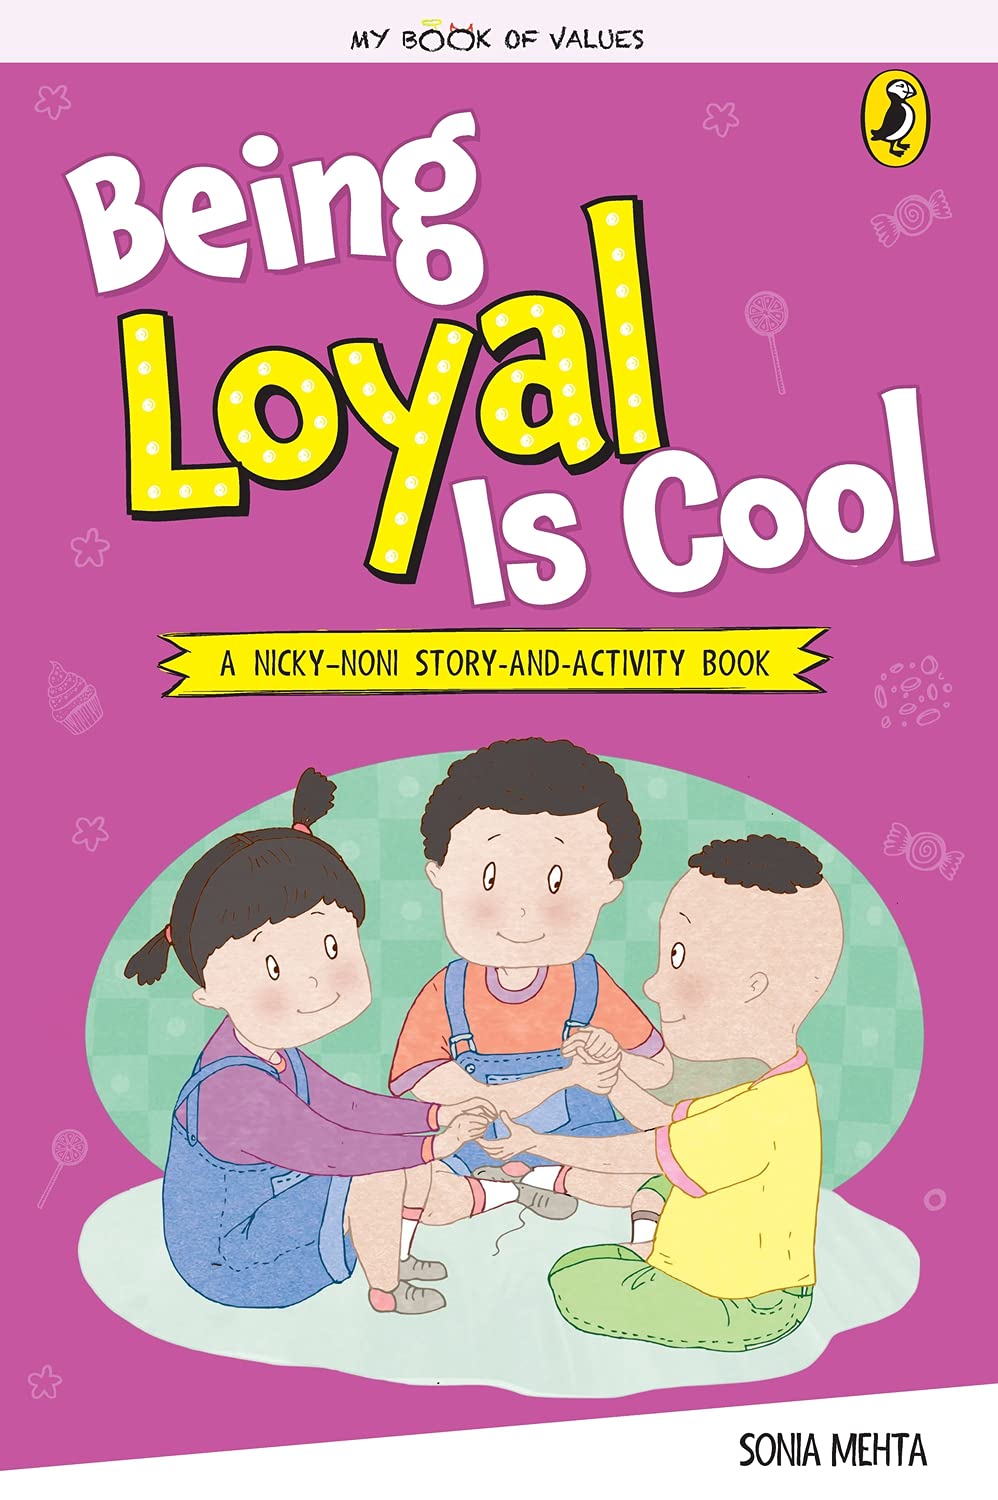 IMG : My Book of Values- Being Loyal is Cool